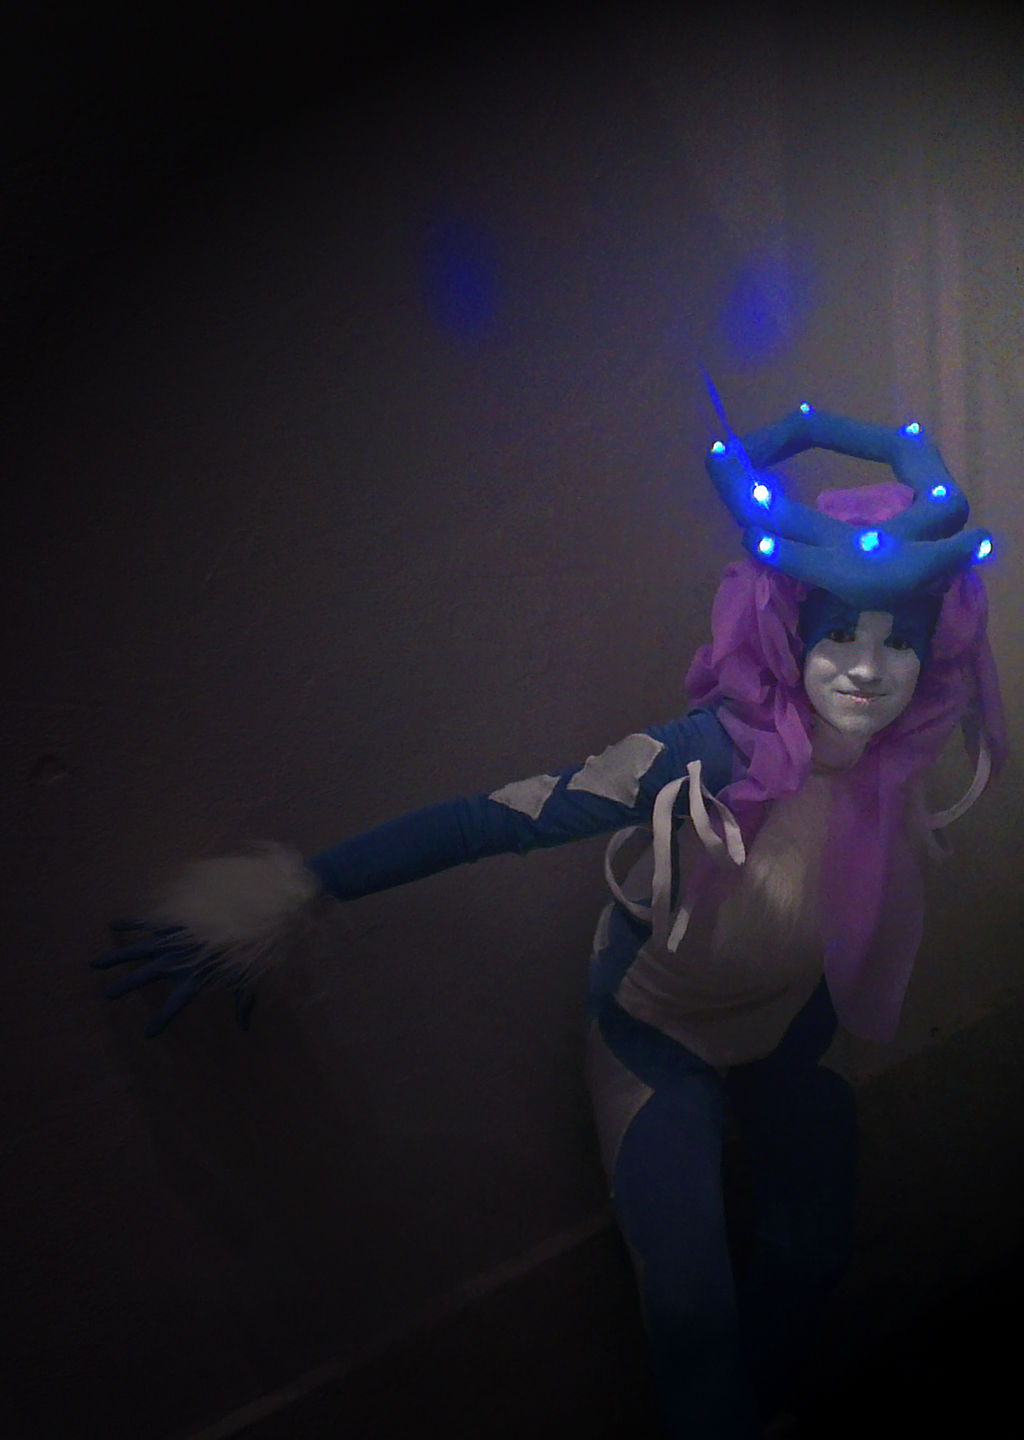 Shine bright (Suicune Cosplay)